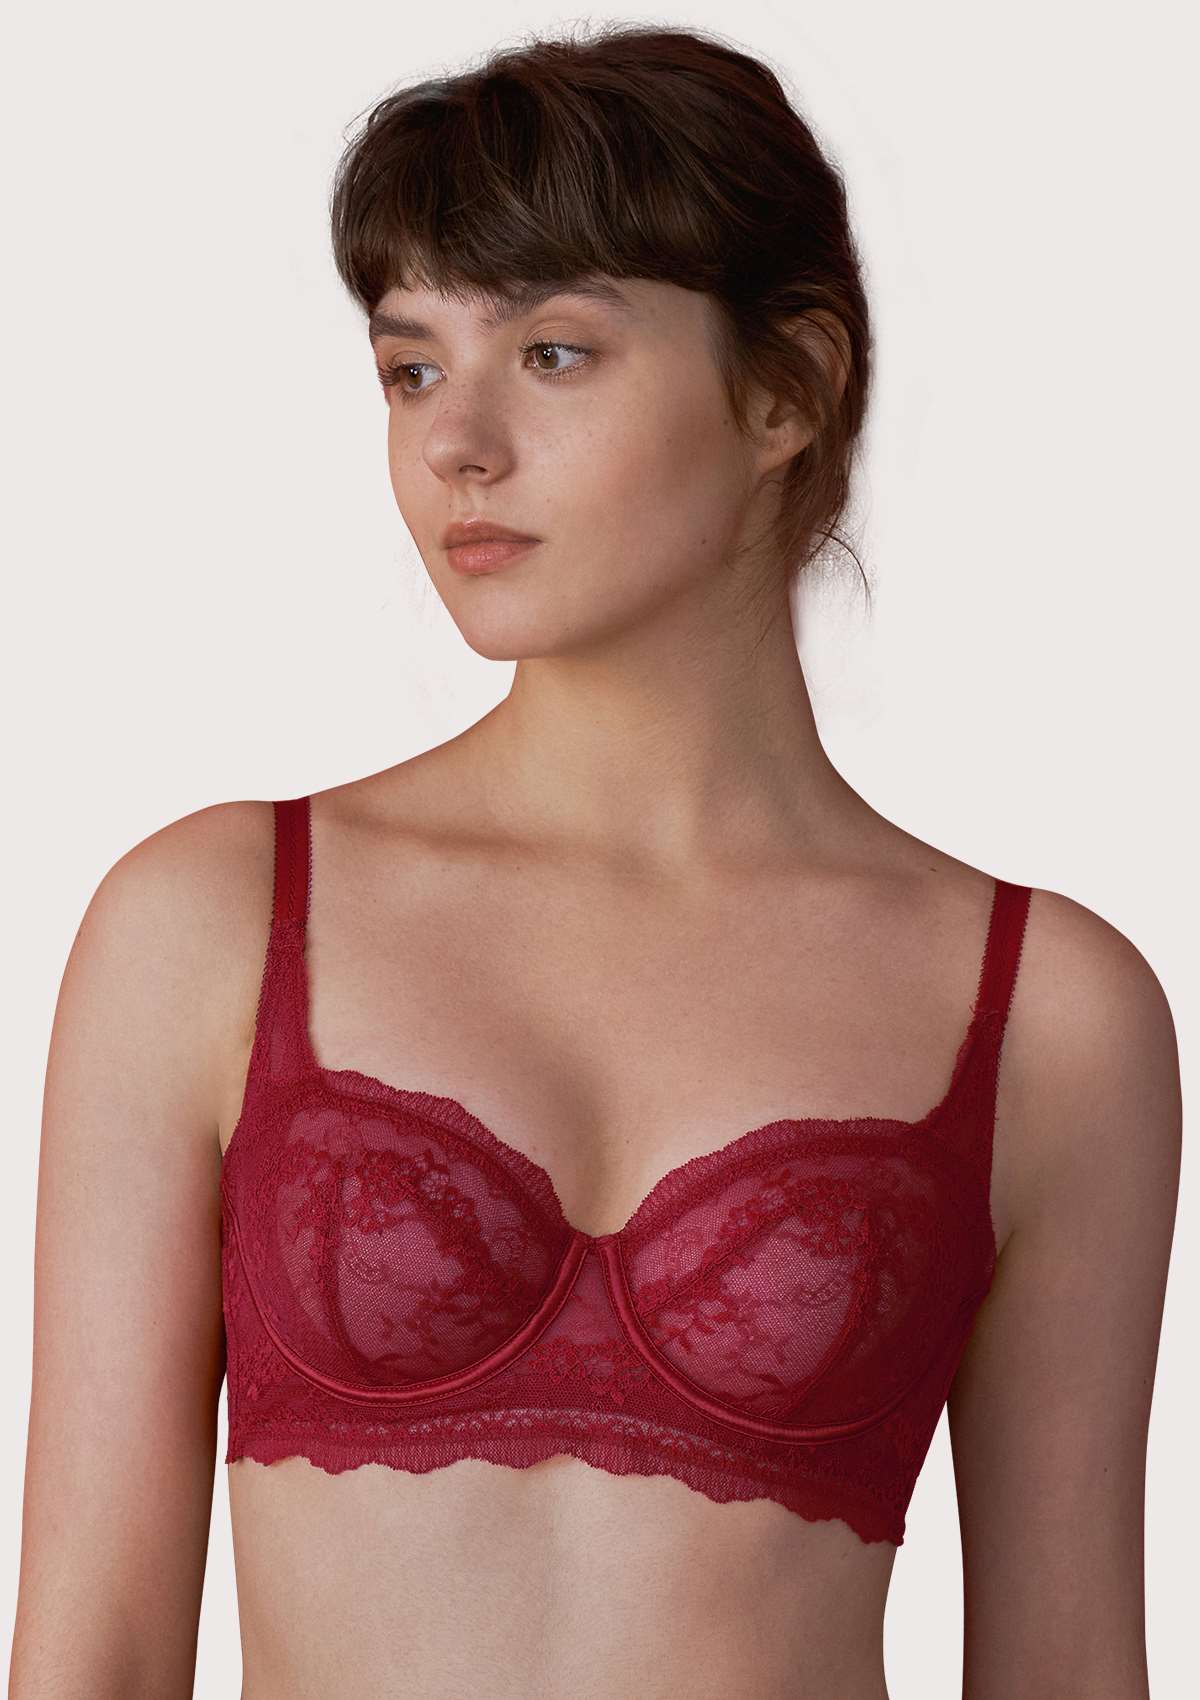 HSIA Floral Lace Unlined Bridal Balconette Bra Set - Supportive Classic - Burgundy / 42 / DDD/F